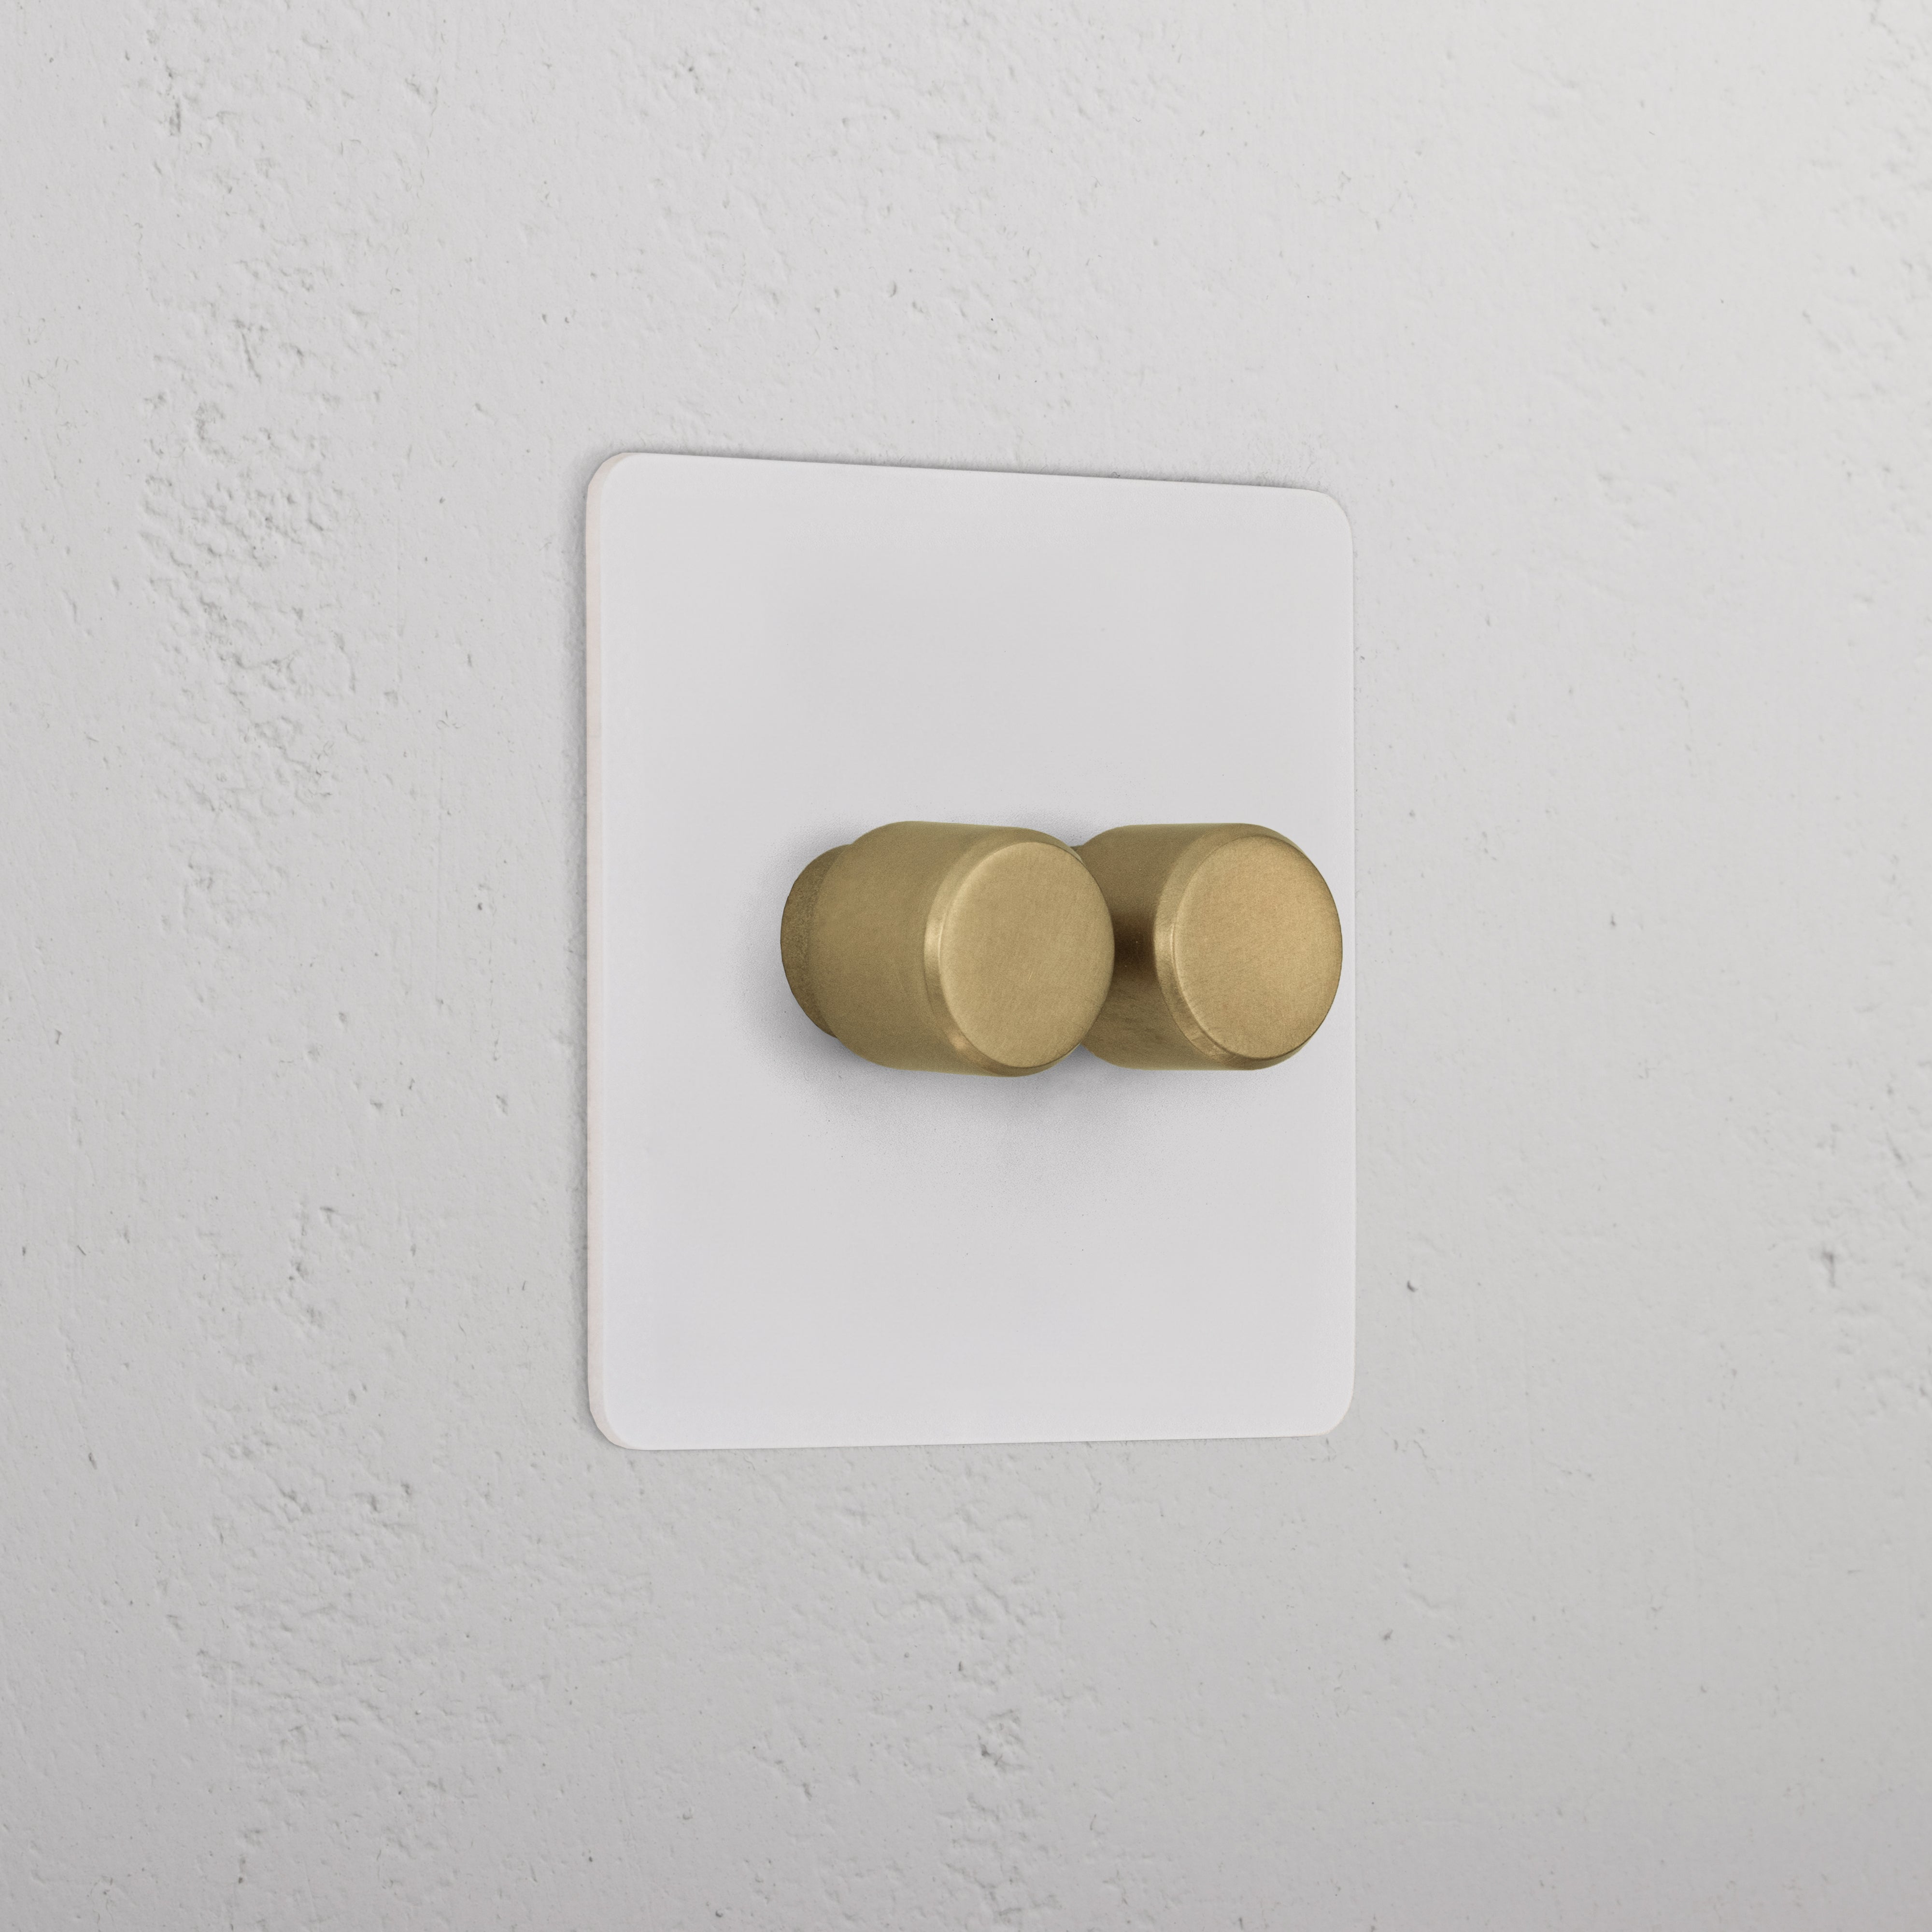 2G Dimmer Switch _ Paintable Antique Brass